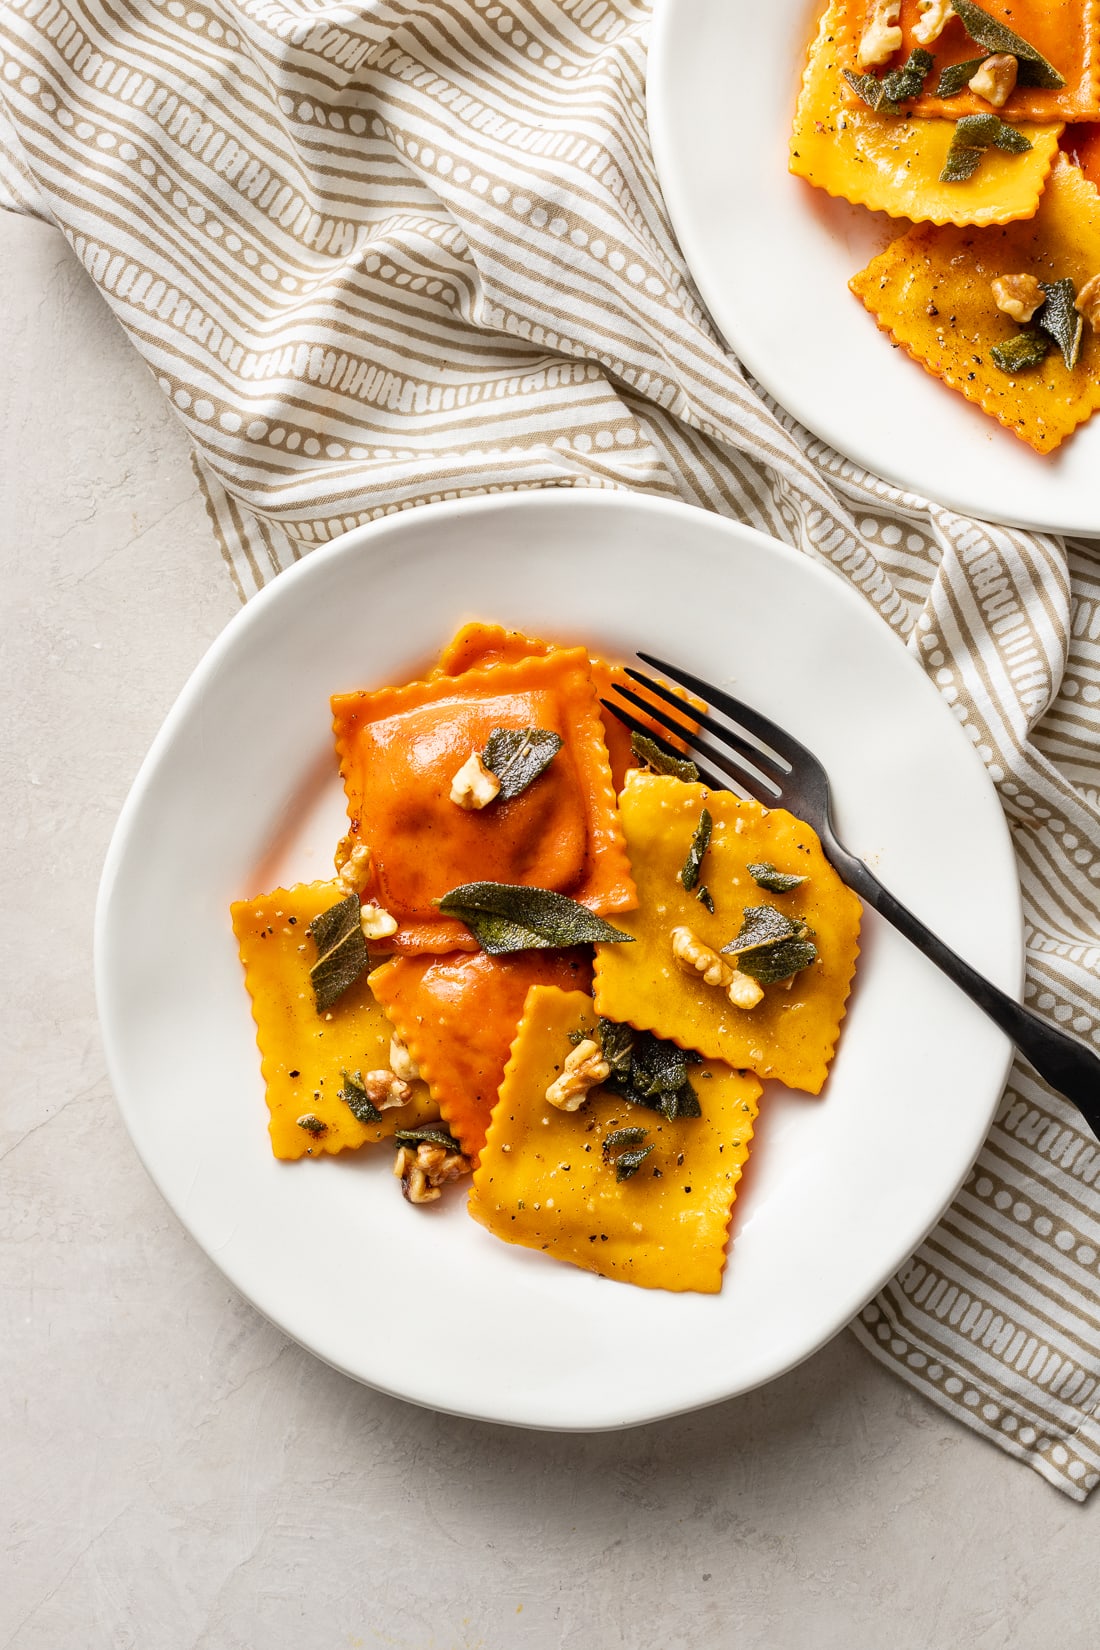 A plate with orange and yellow pumpkin ravioli garnished with sage brown butter sauce and toasted walnuts.